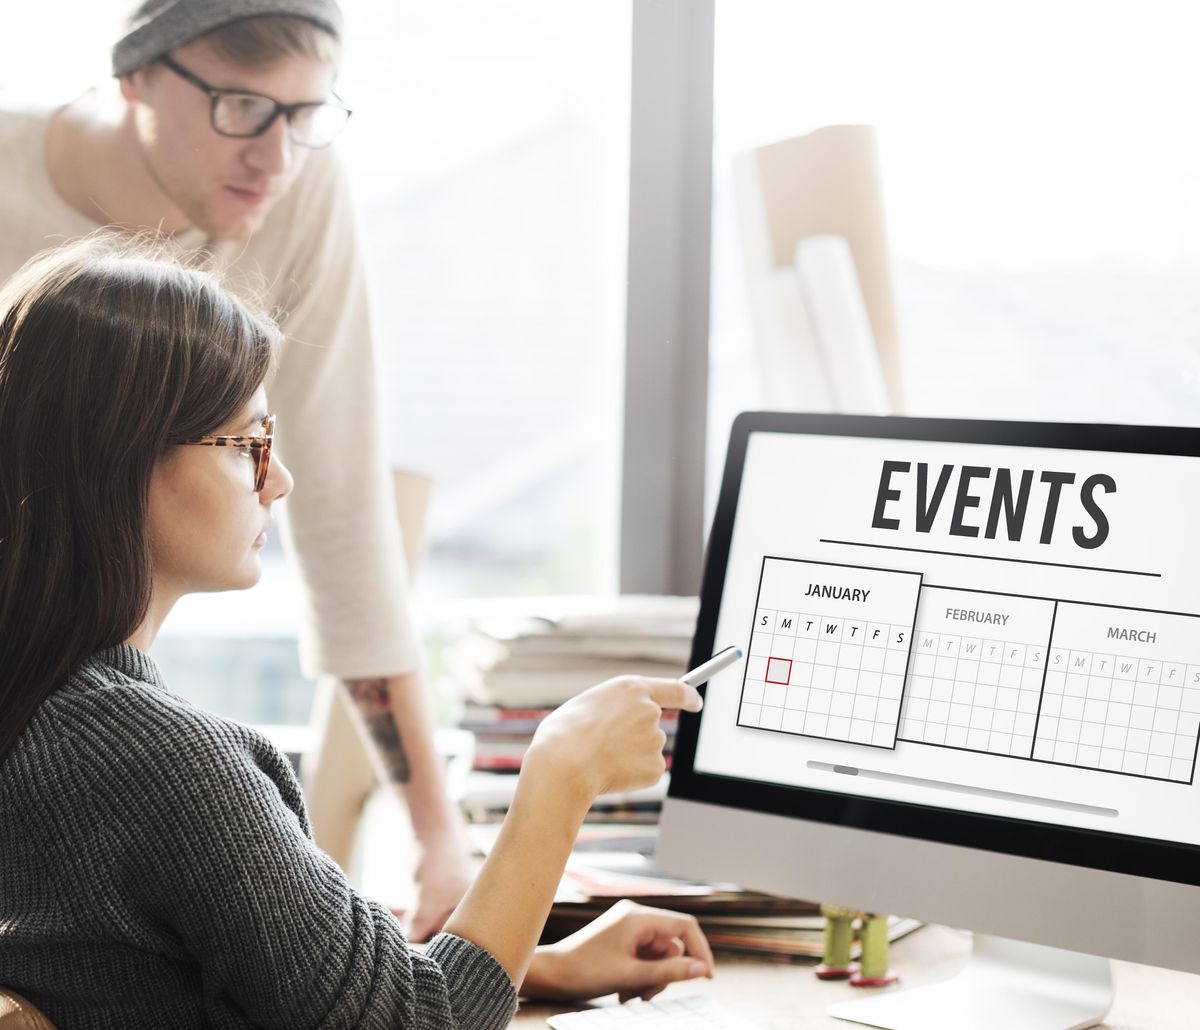 Certificate in Event Management, 8 Monday Evening Classes, Course in London